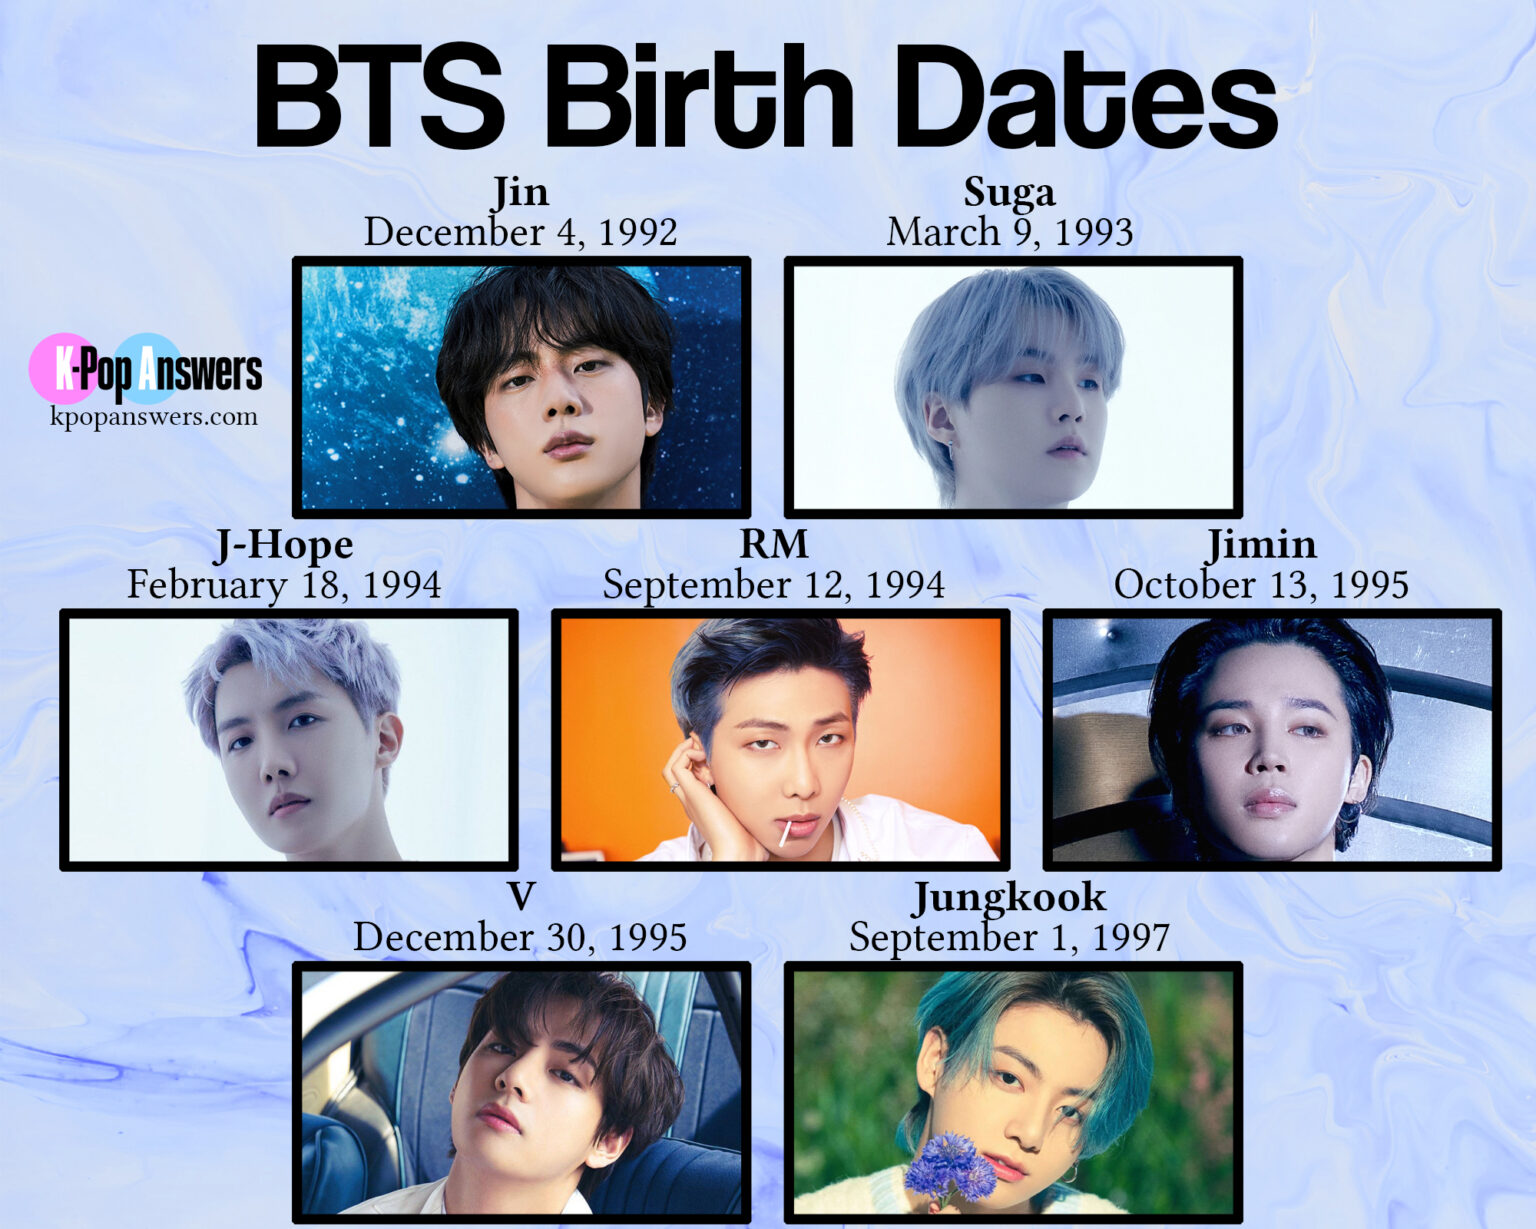 How Old Are the BTS Members?